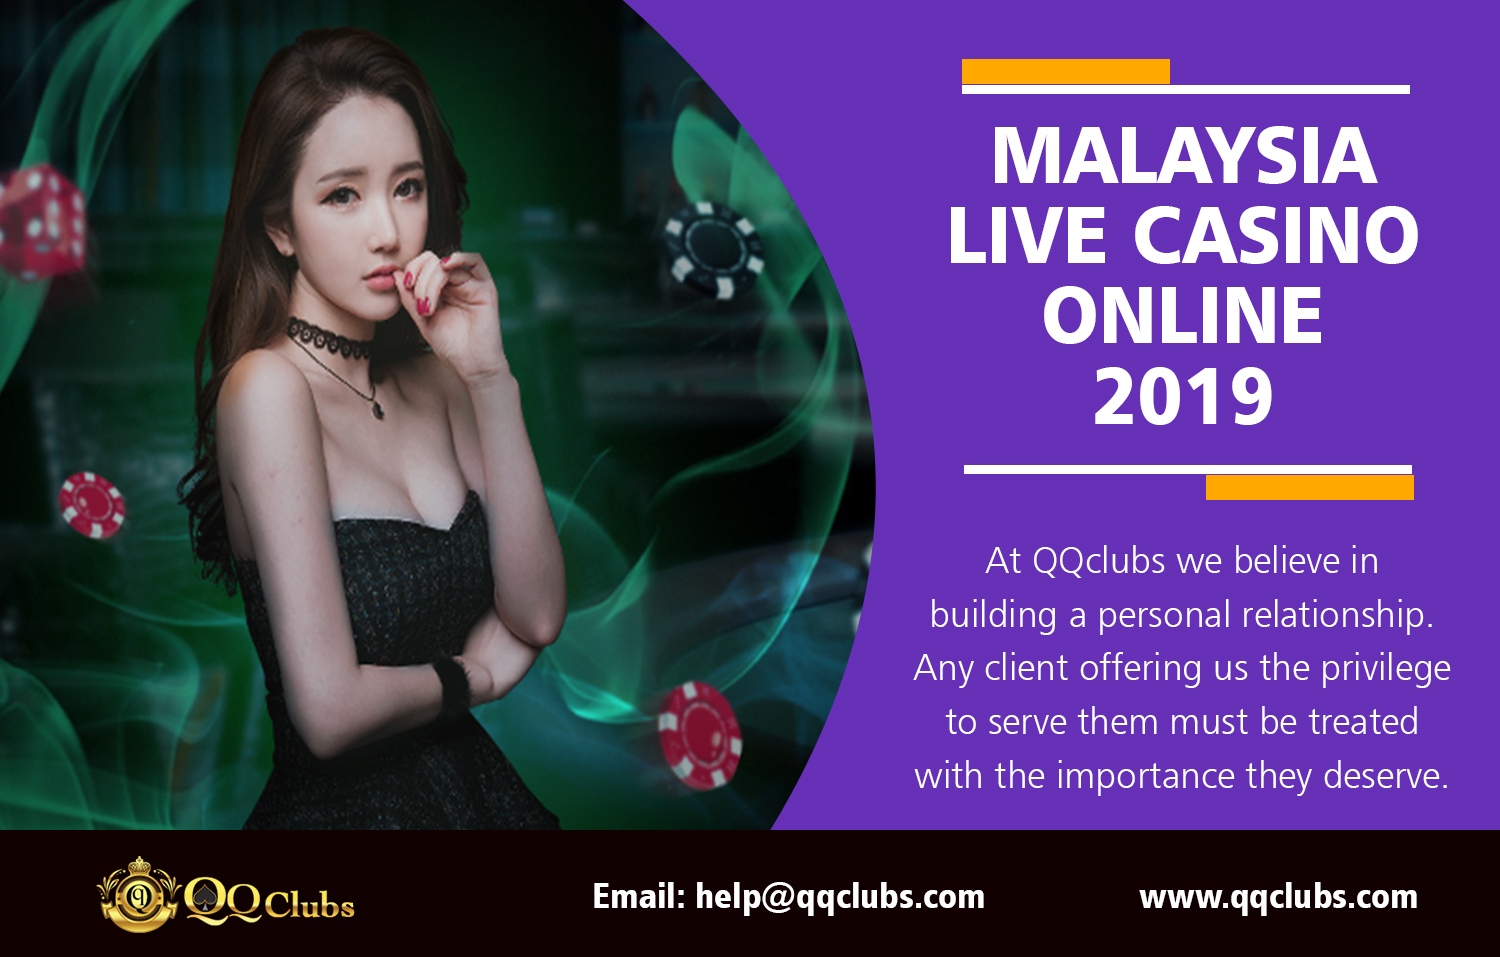 powered by ipb trusted online casino malaysia